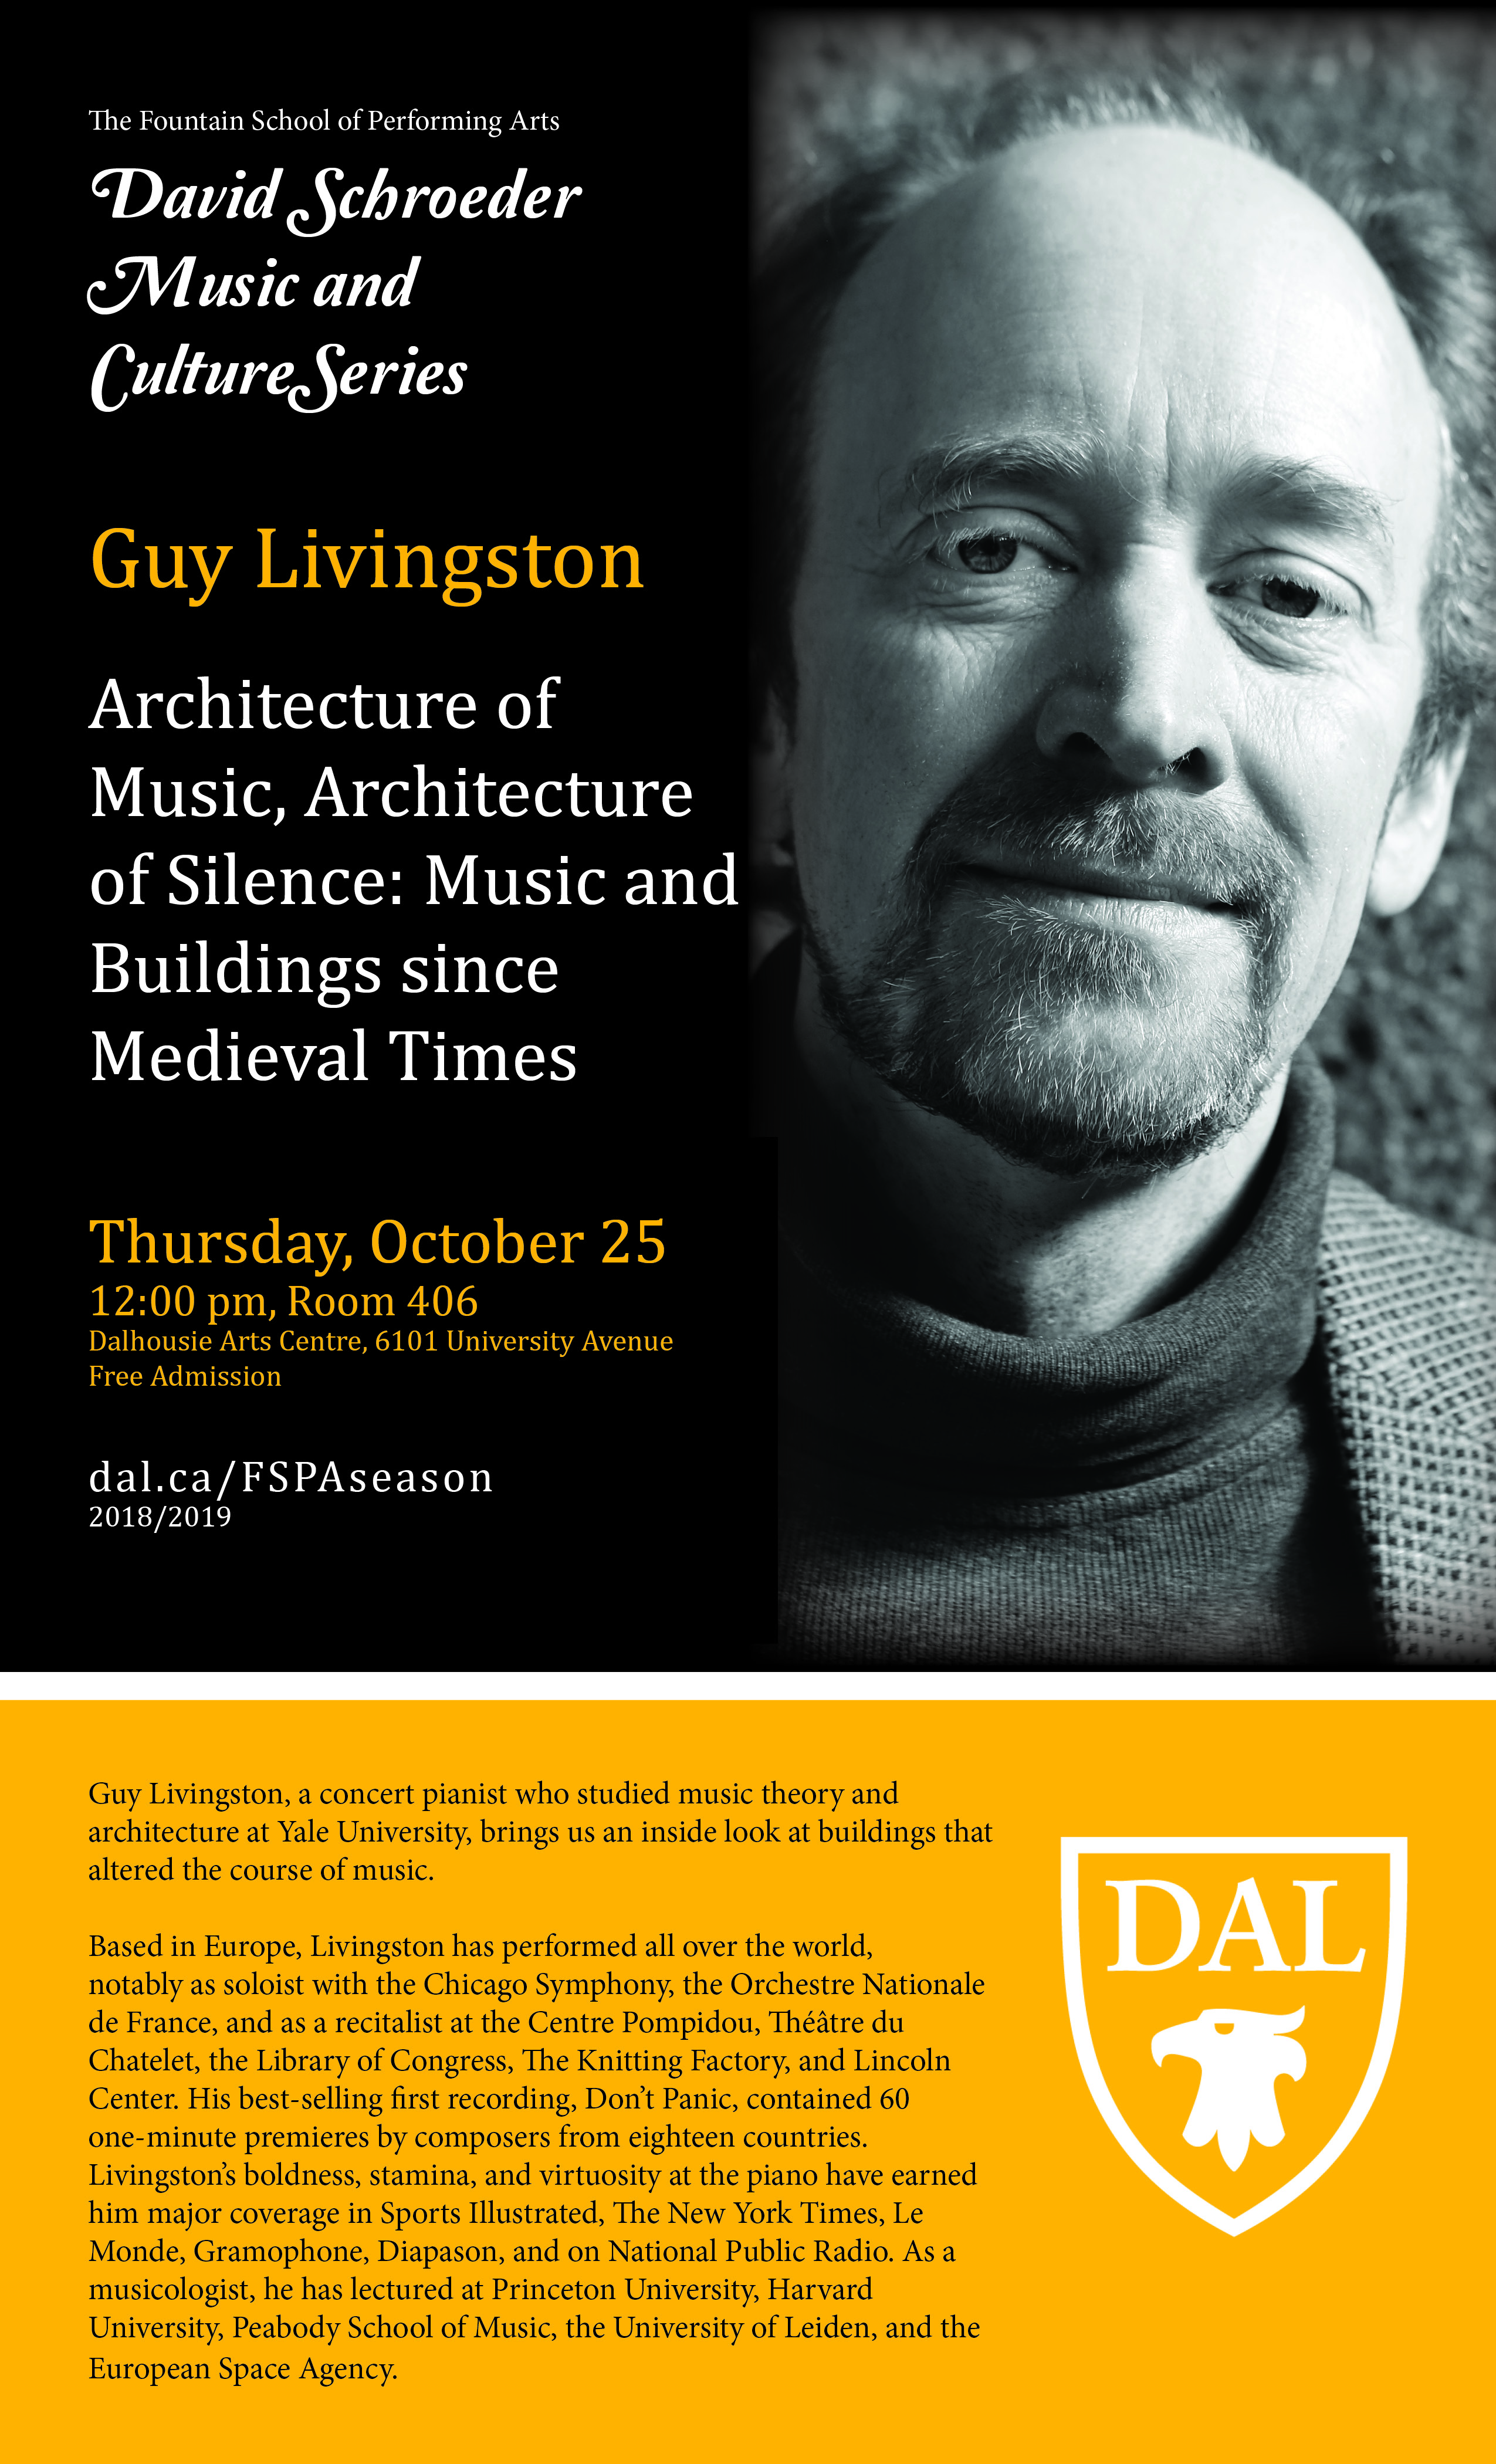 Poster for Schroeder Lecture at the Fountain School of Performing Arts, Halifax